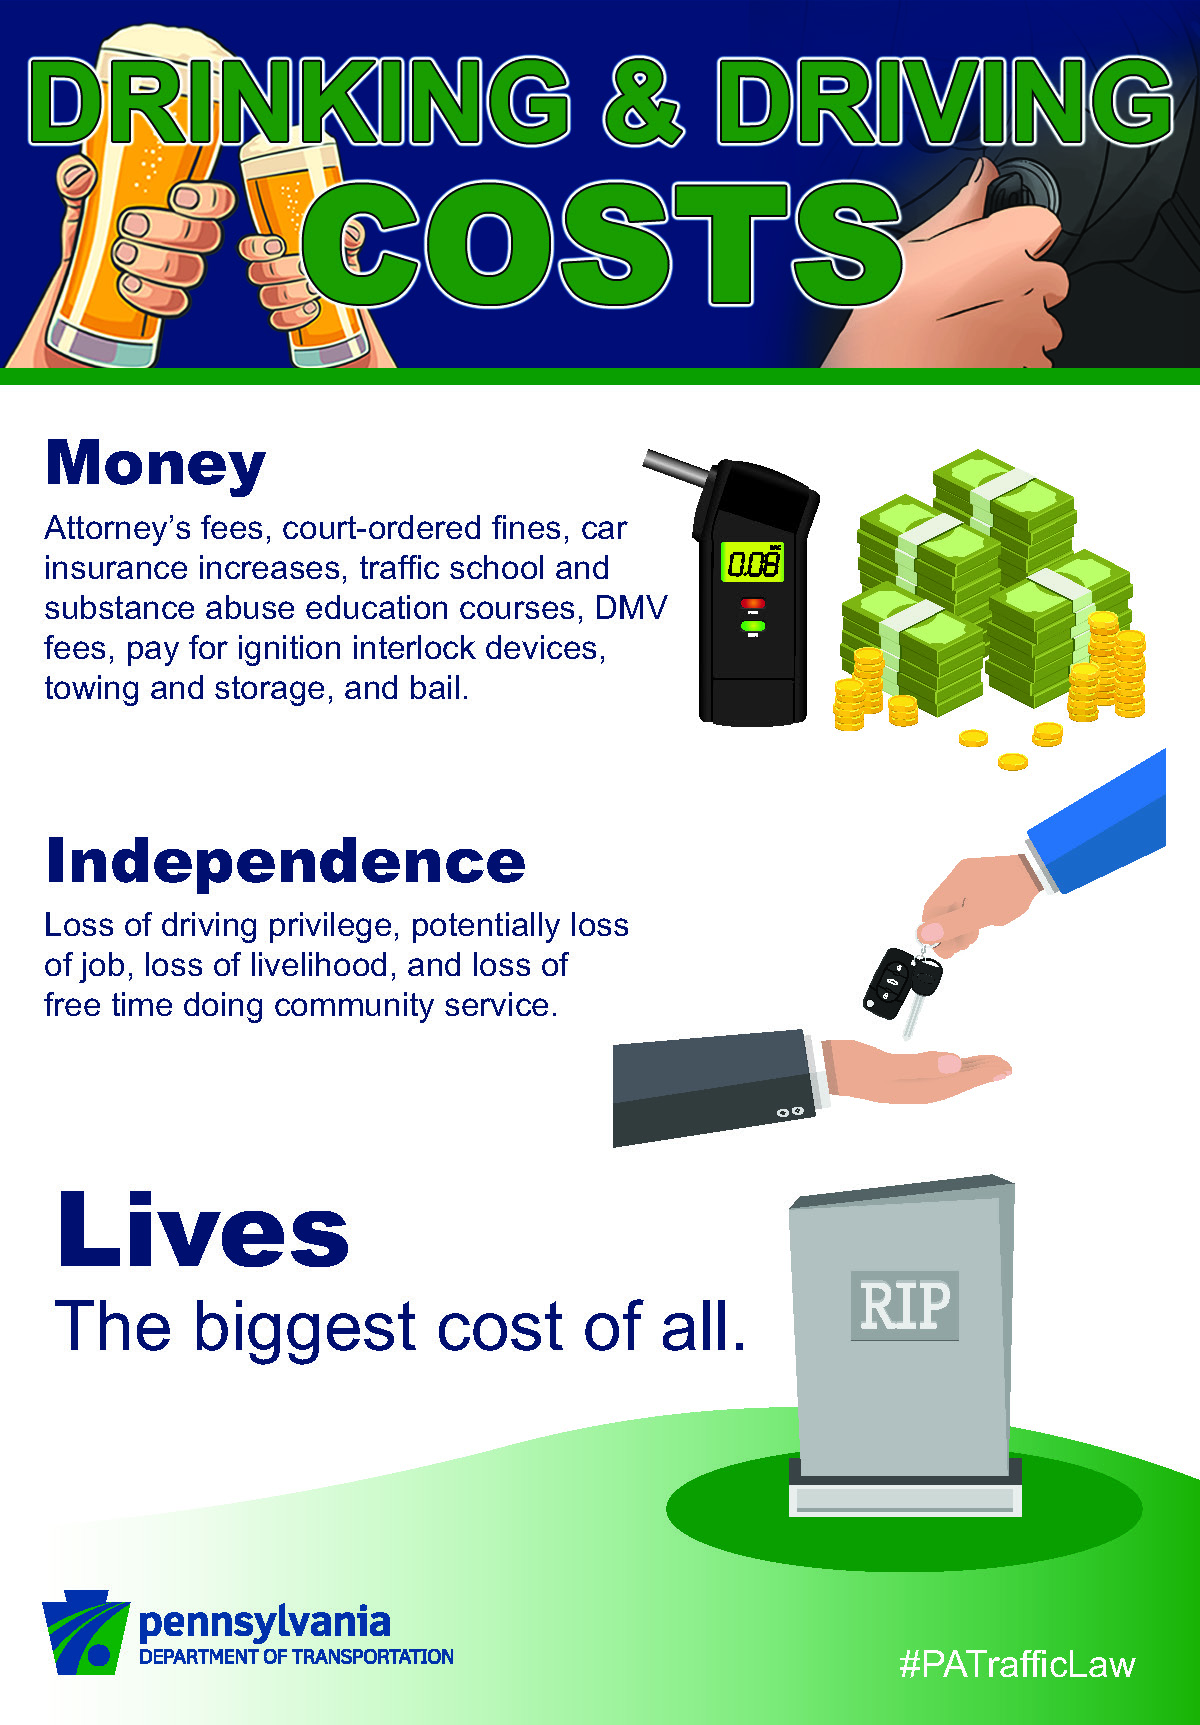 costs of drinking and driving infographic